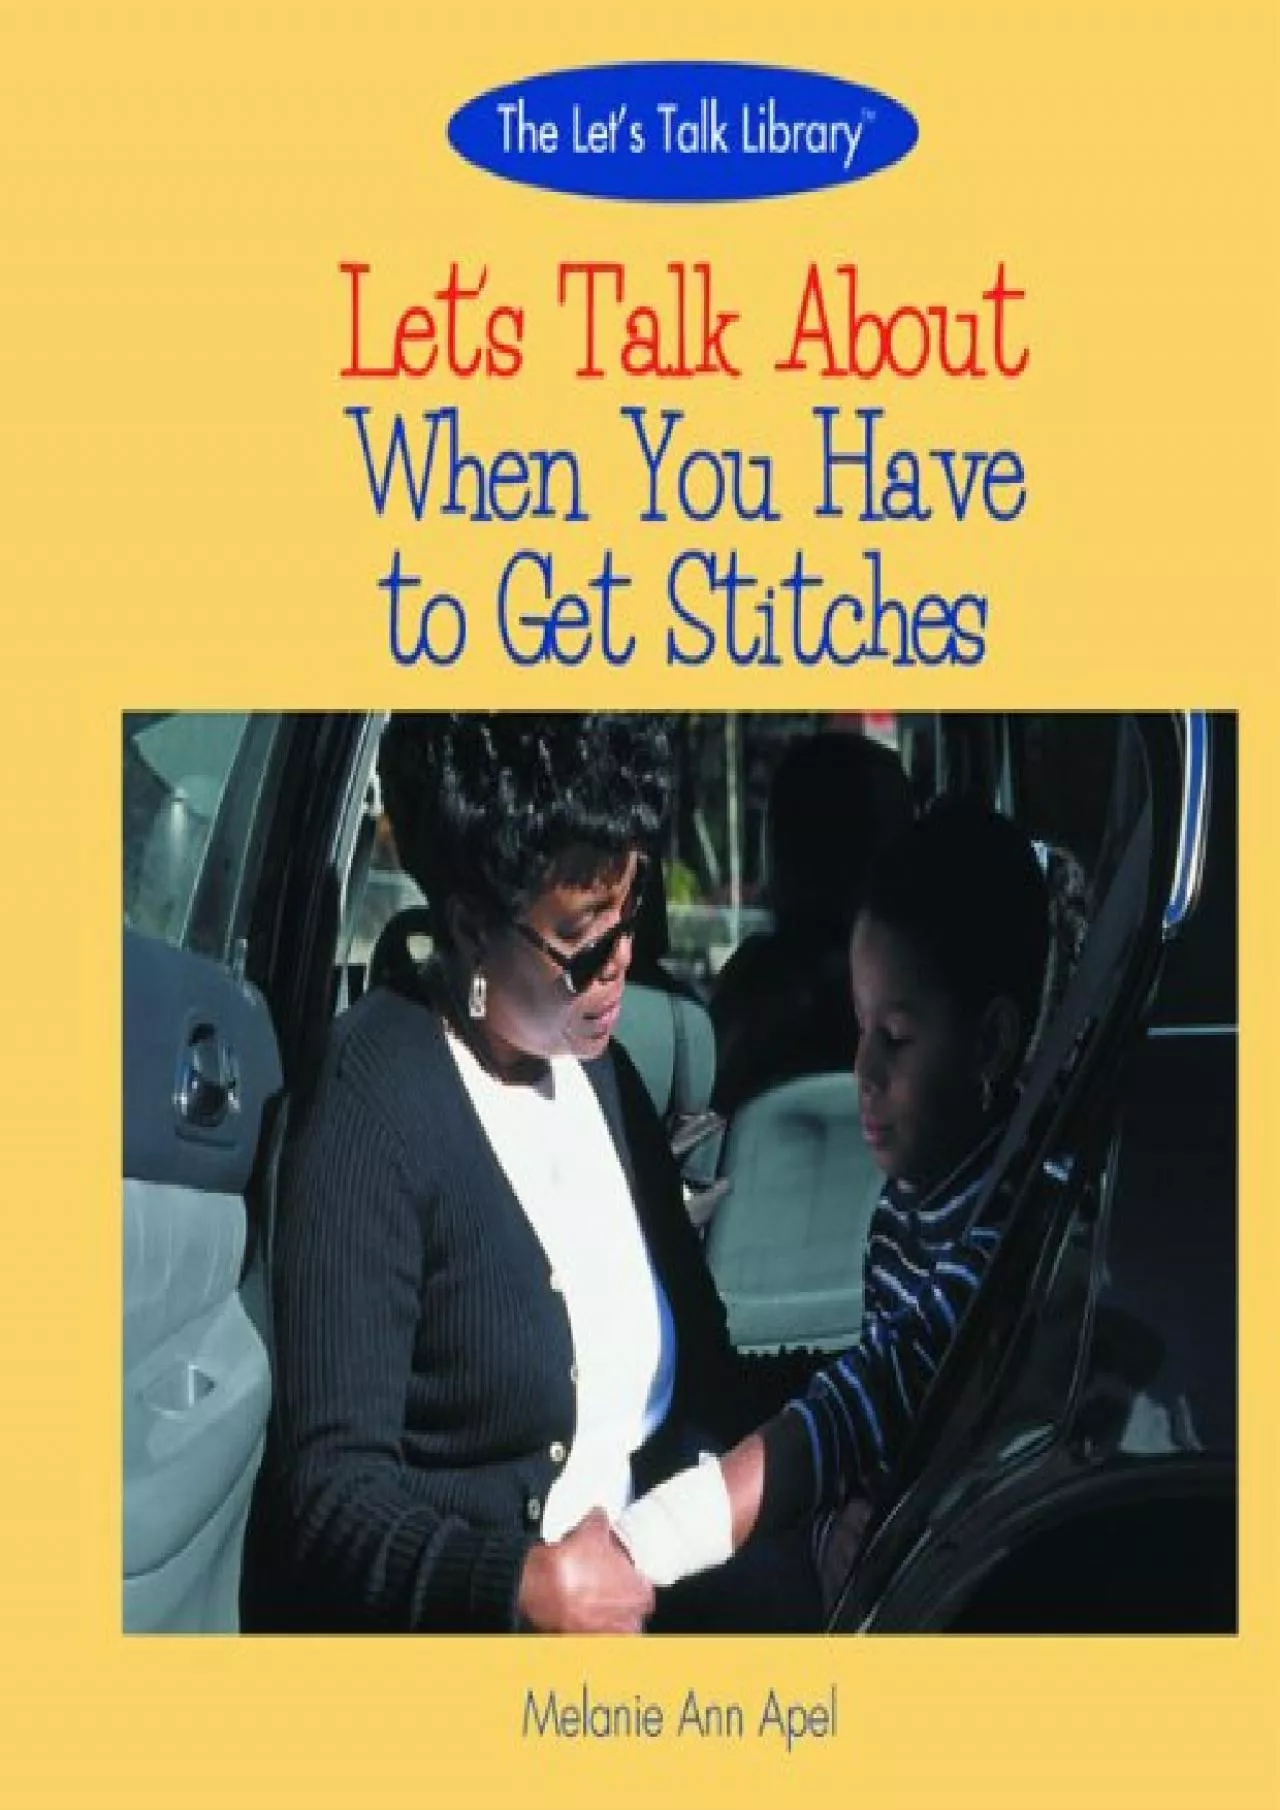 (DOWNLOAD)-Let\'s Talk About When You Have Stitches (The Let\'s Talk About Library)